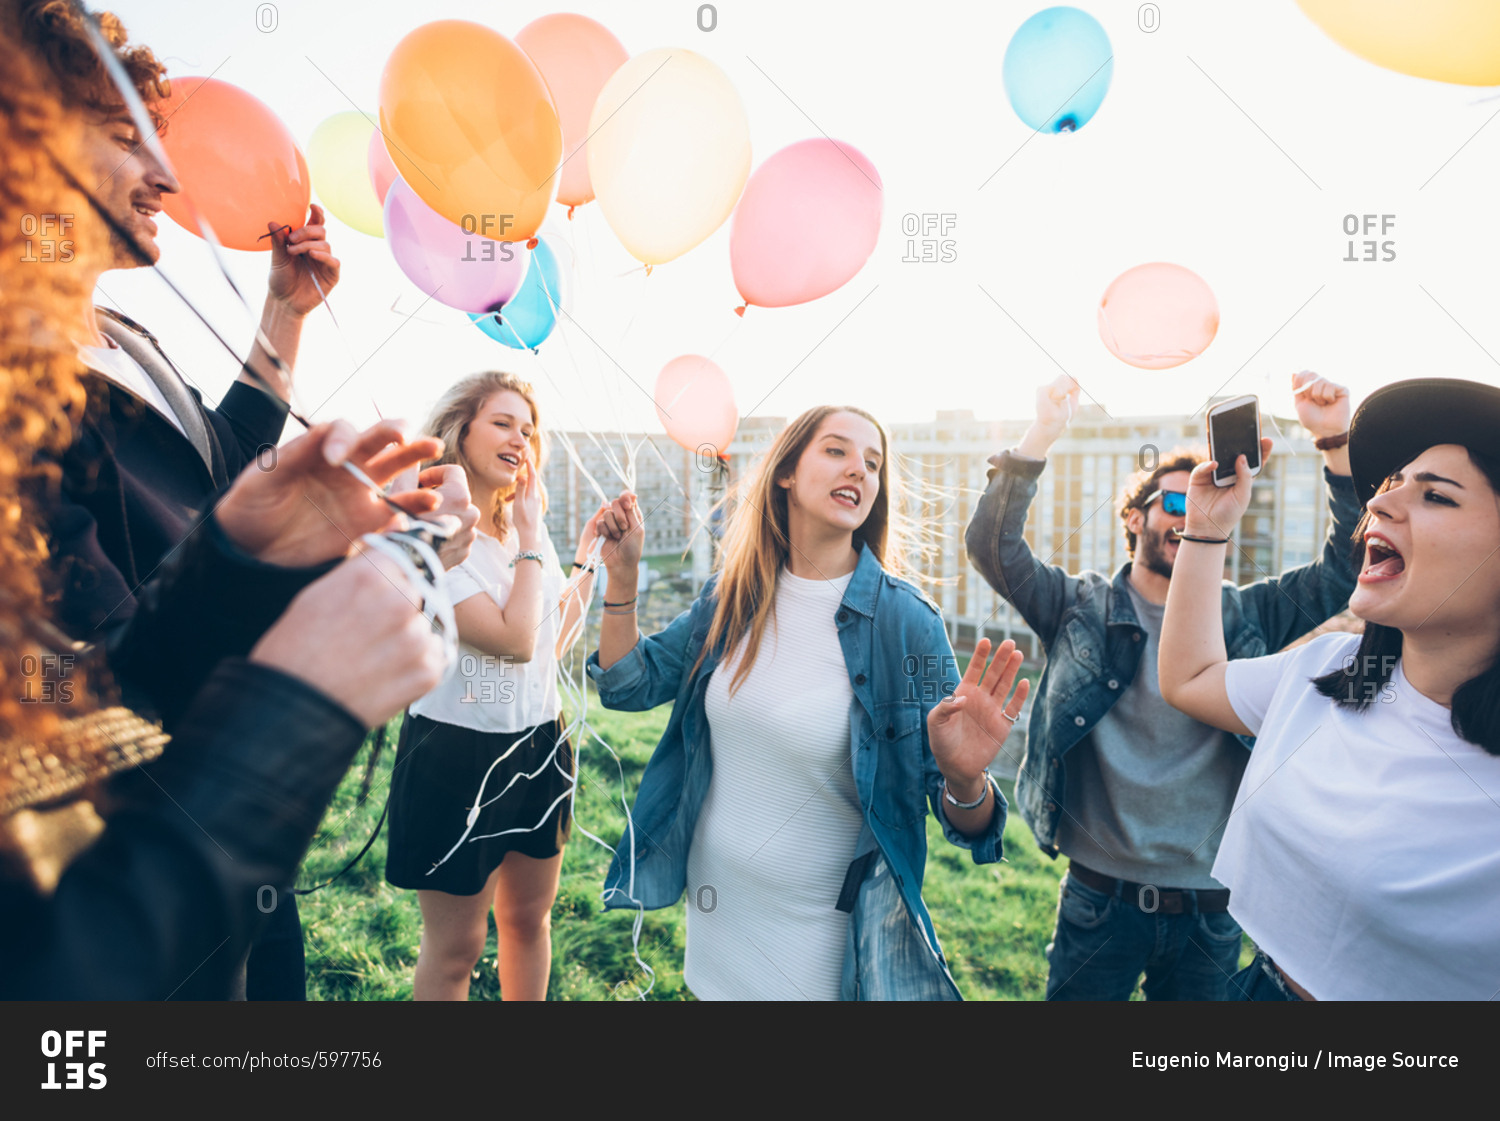 Group of friends enjoying roof party, holding helium balloons